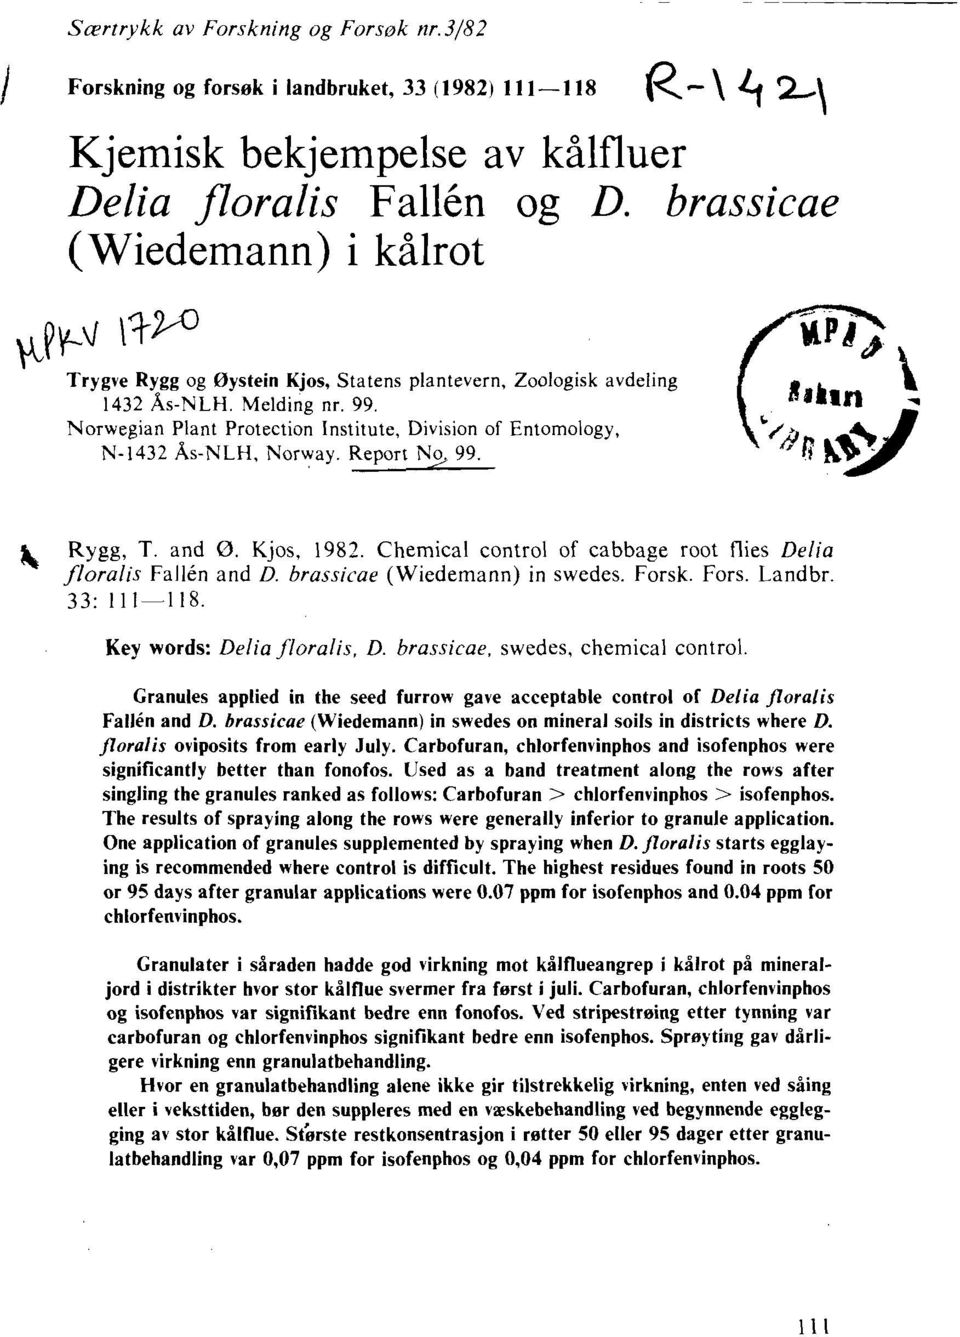 Norwegian Plant Protection Institute, Division of Entomology, N-1432 As-NLH, Norway. Report N,9: 99. Rygg, T. and 0. Kjos, 1982. Chemical control of cabbage root flies Delia floralis Fallen and D.